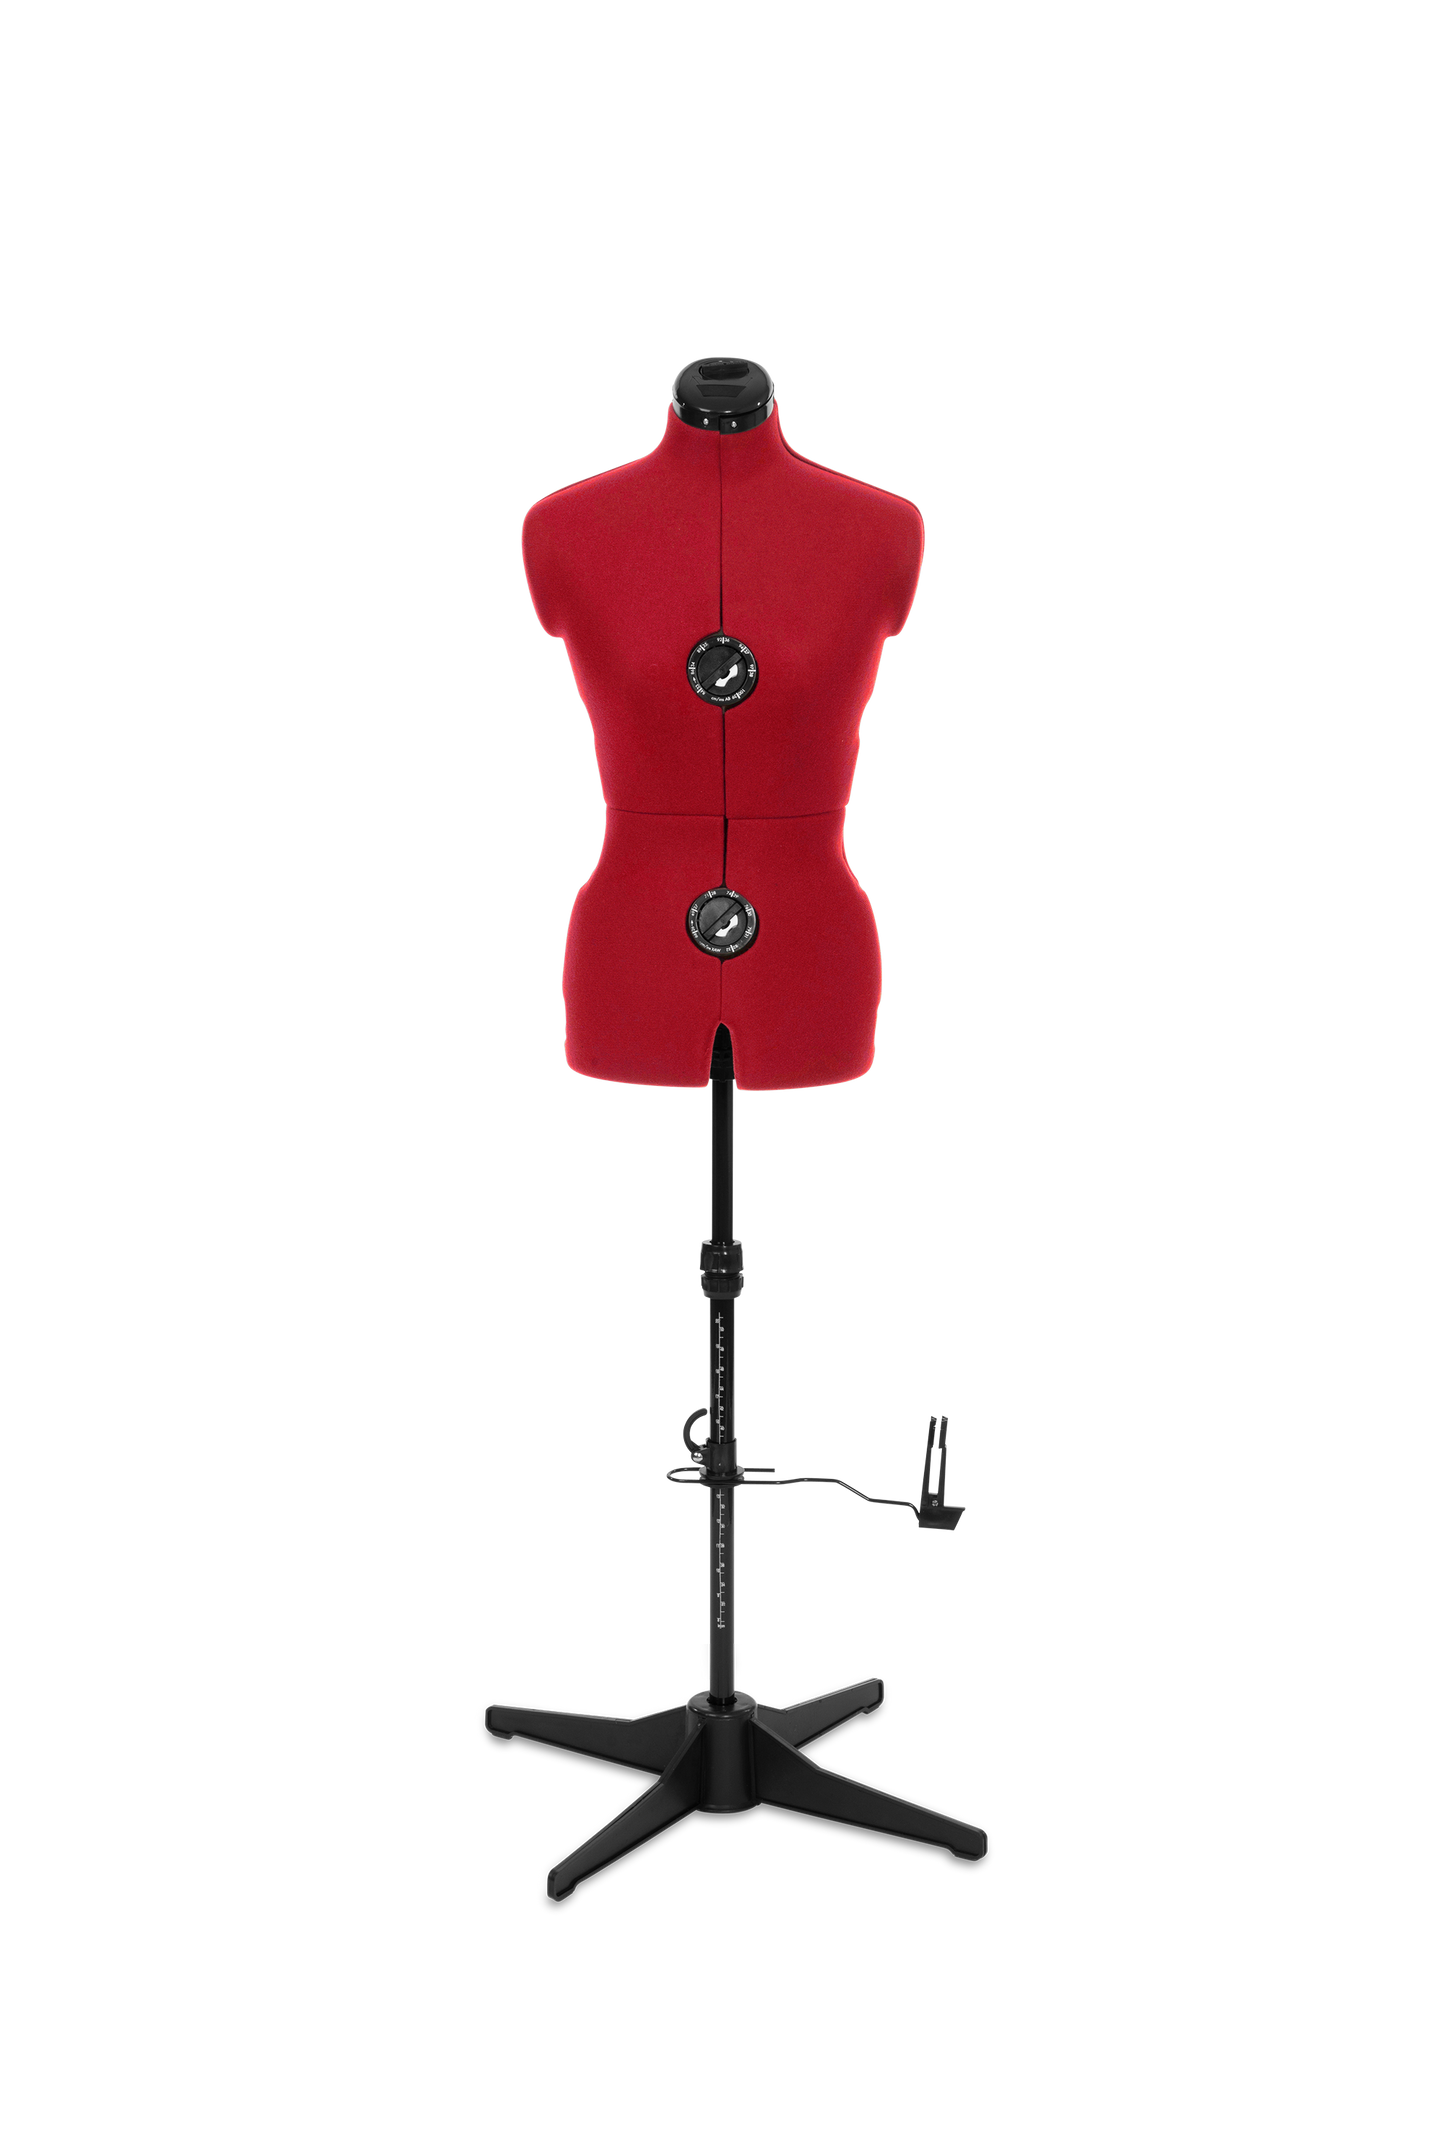 Adjustoform Elizabeth Tailormaid Limited Edition Dress Form with Stand and Base - Bundle with Accessory Kit - Heavy Duty Adjustable Dress Form with 8 part body and 11 adjusters - Dress sizes from 6 to 24